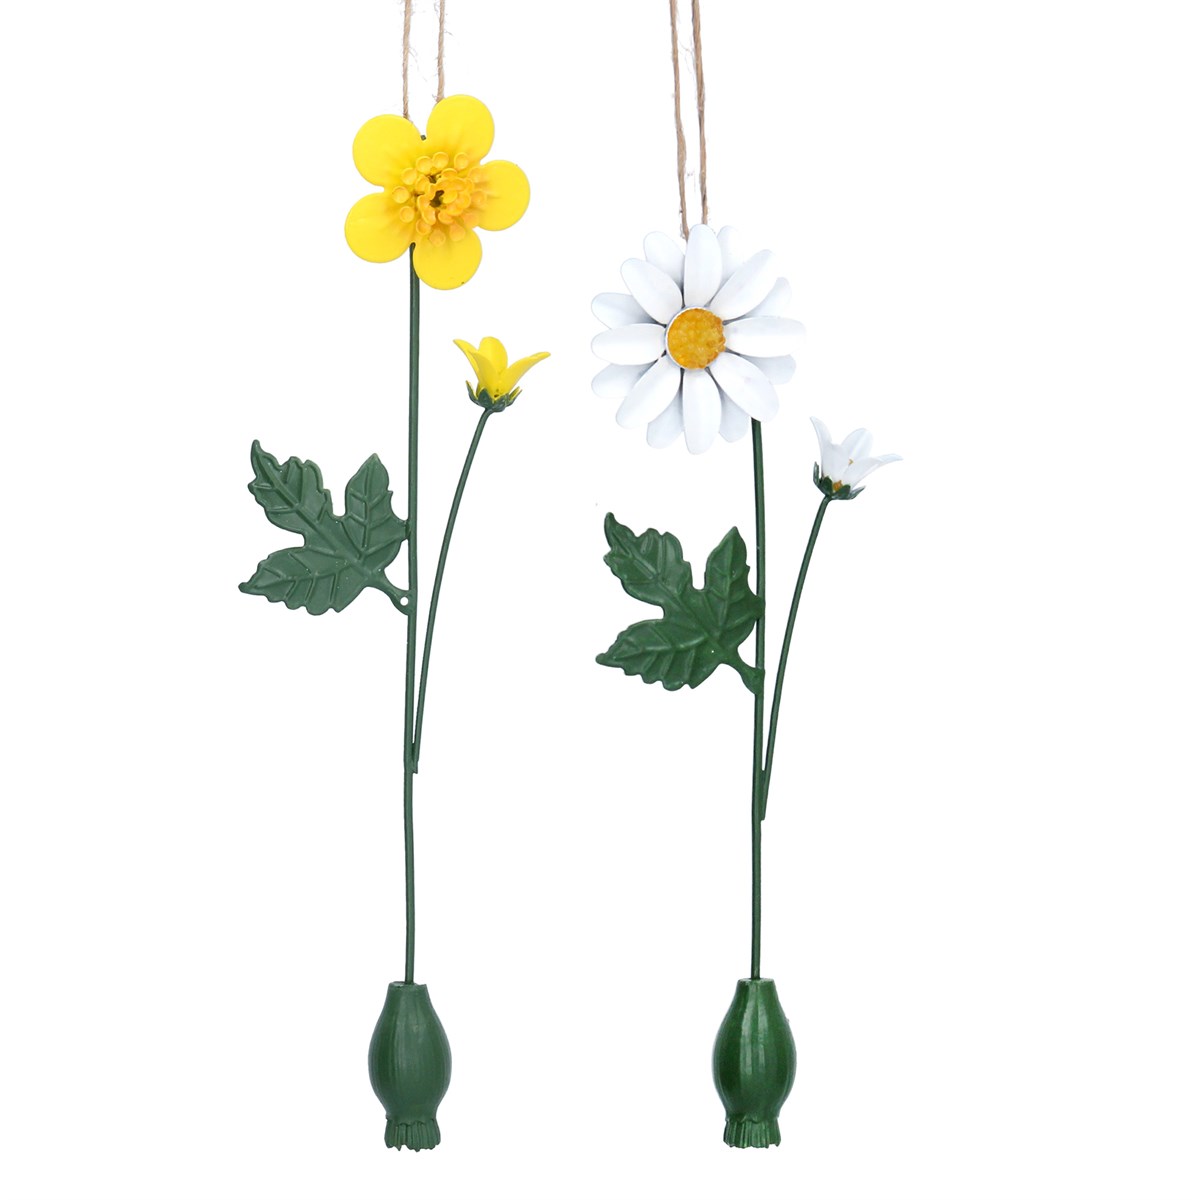 Gisela Graham 6 x Glass Eggs With Feathers Easter Decoration Hanging Tree Gisela Graham Gold 5030026805735 